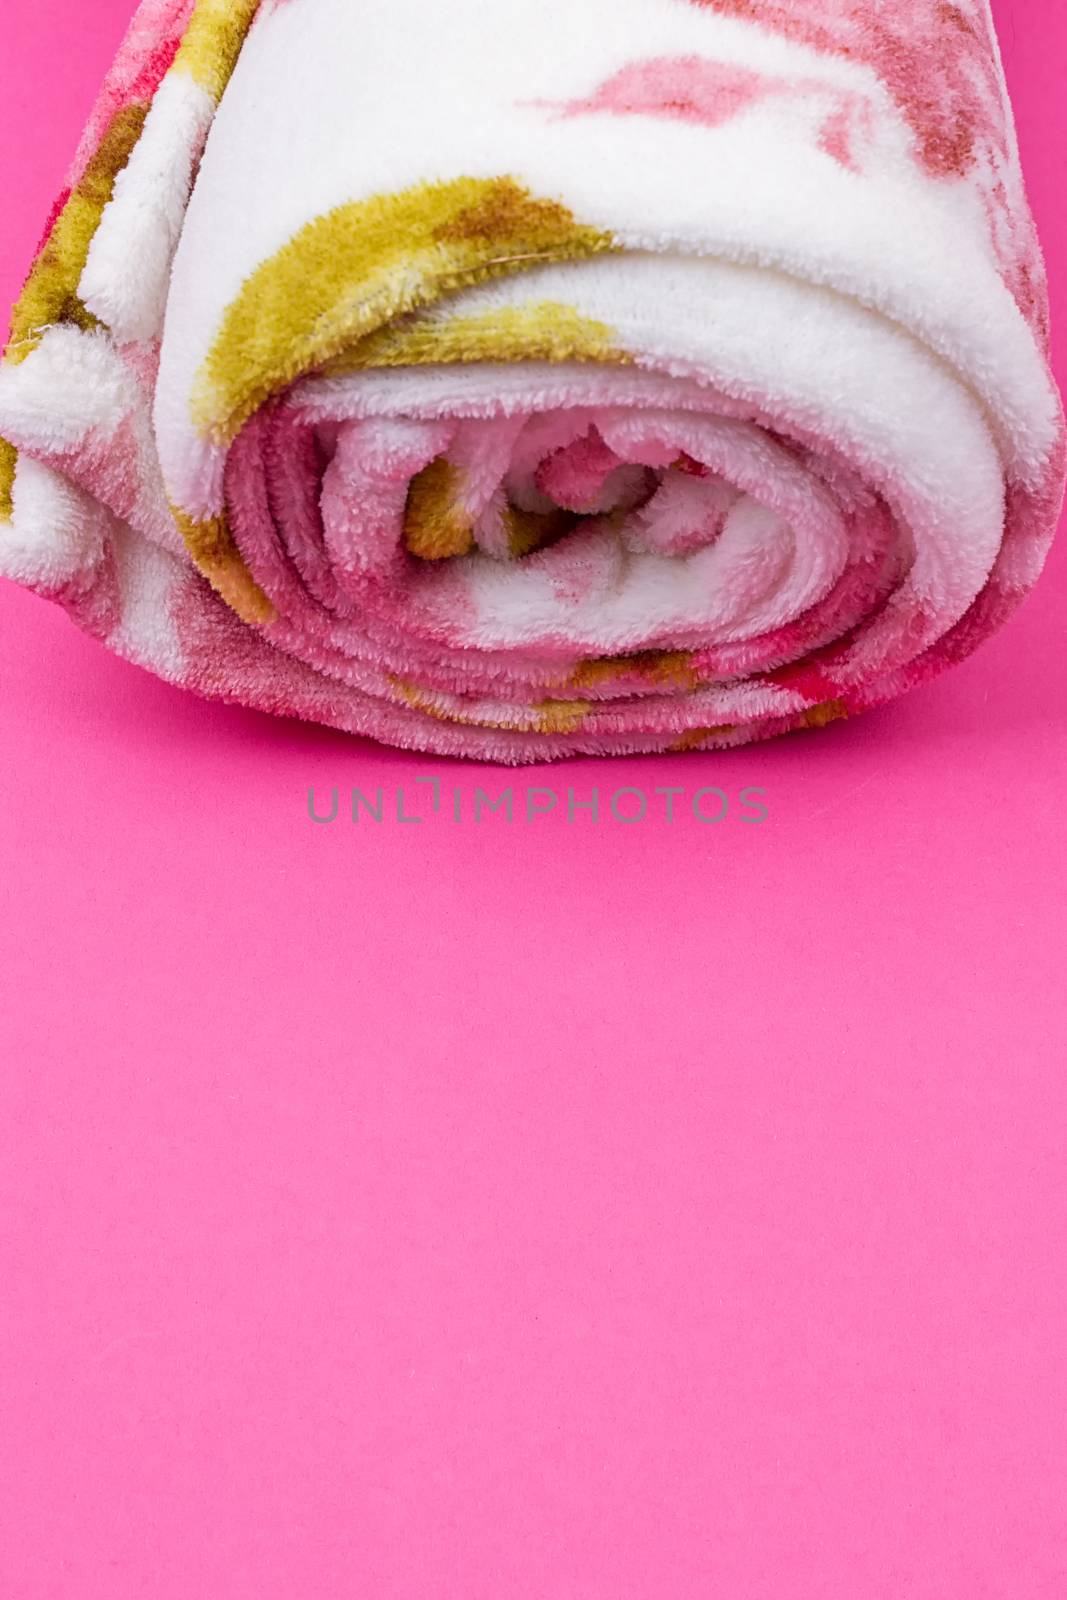 Roll of plaid. Coiled plaid on the pink background